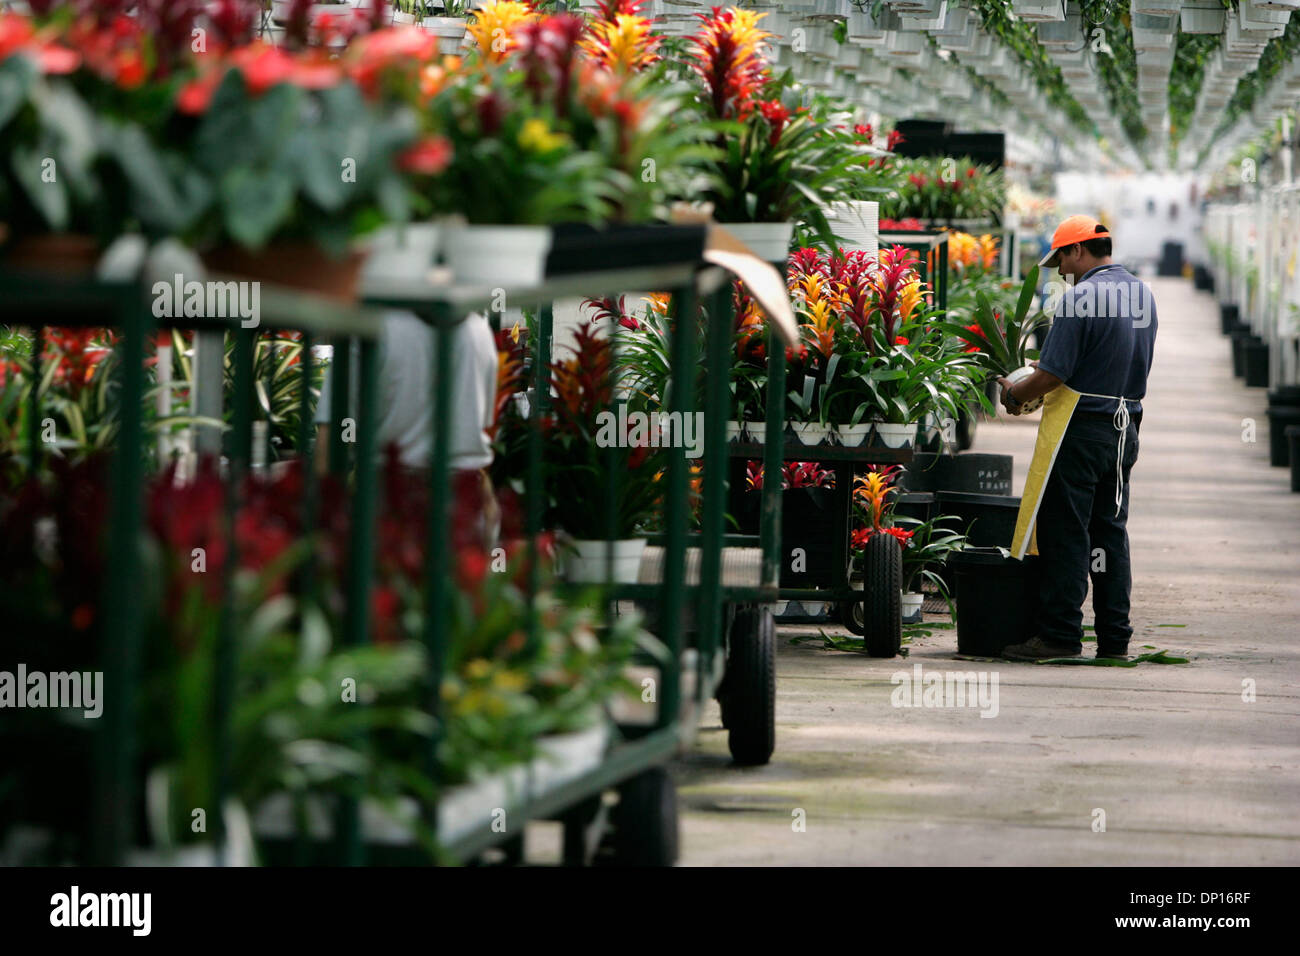 Apr 21, 2006; Fallbrook, CA, USA; BENJAMIN NICOLAS ROMERO works under a canopy of indoor plants with several varieties of Guzmania Bromeliads to arrange them for shipping from Olive Hill Greenhouses in Fallbrook. The company is a big producer of bromeliads, orchids and indoor plants.  Mandatory Credit: Photo by Laura Embry/SDU-T /ZUMA Press. (©) Copyright 2006 by SDU-T Stock Photo